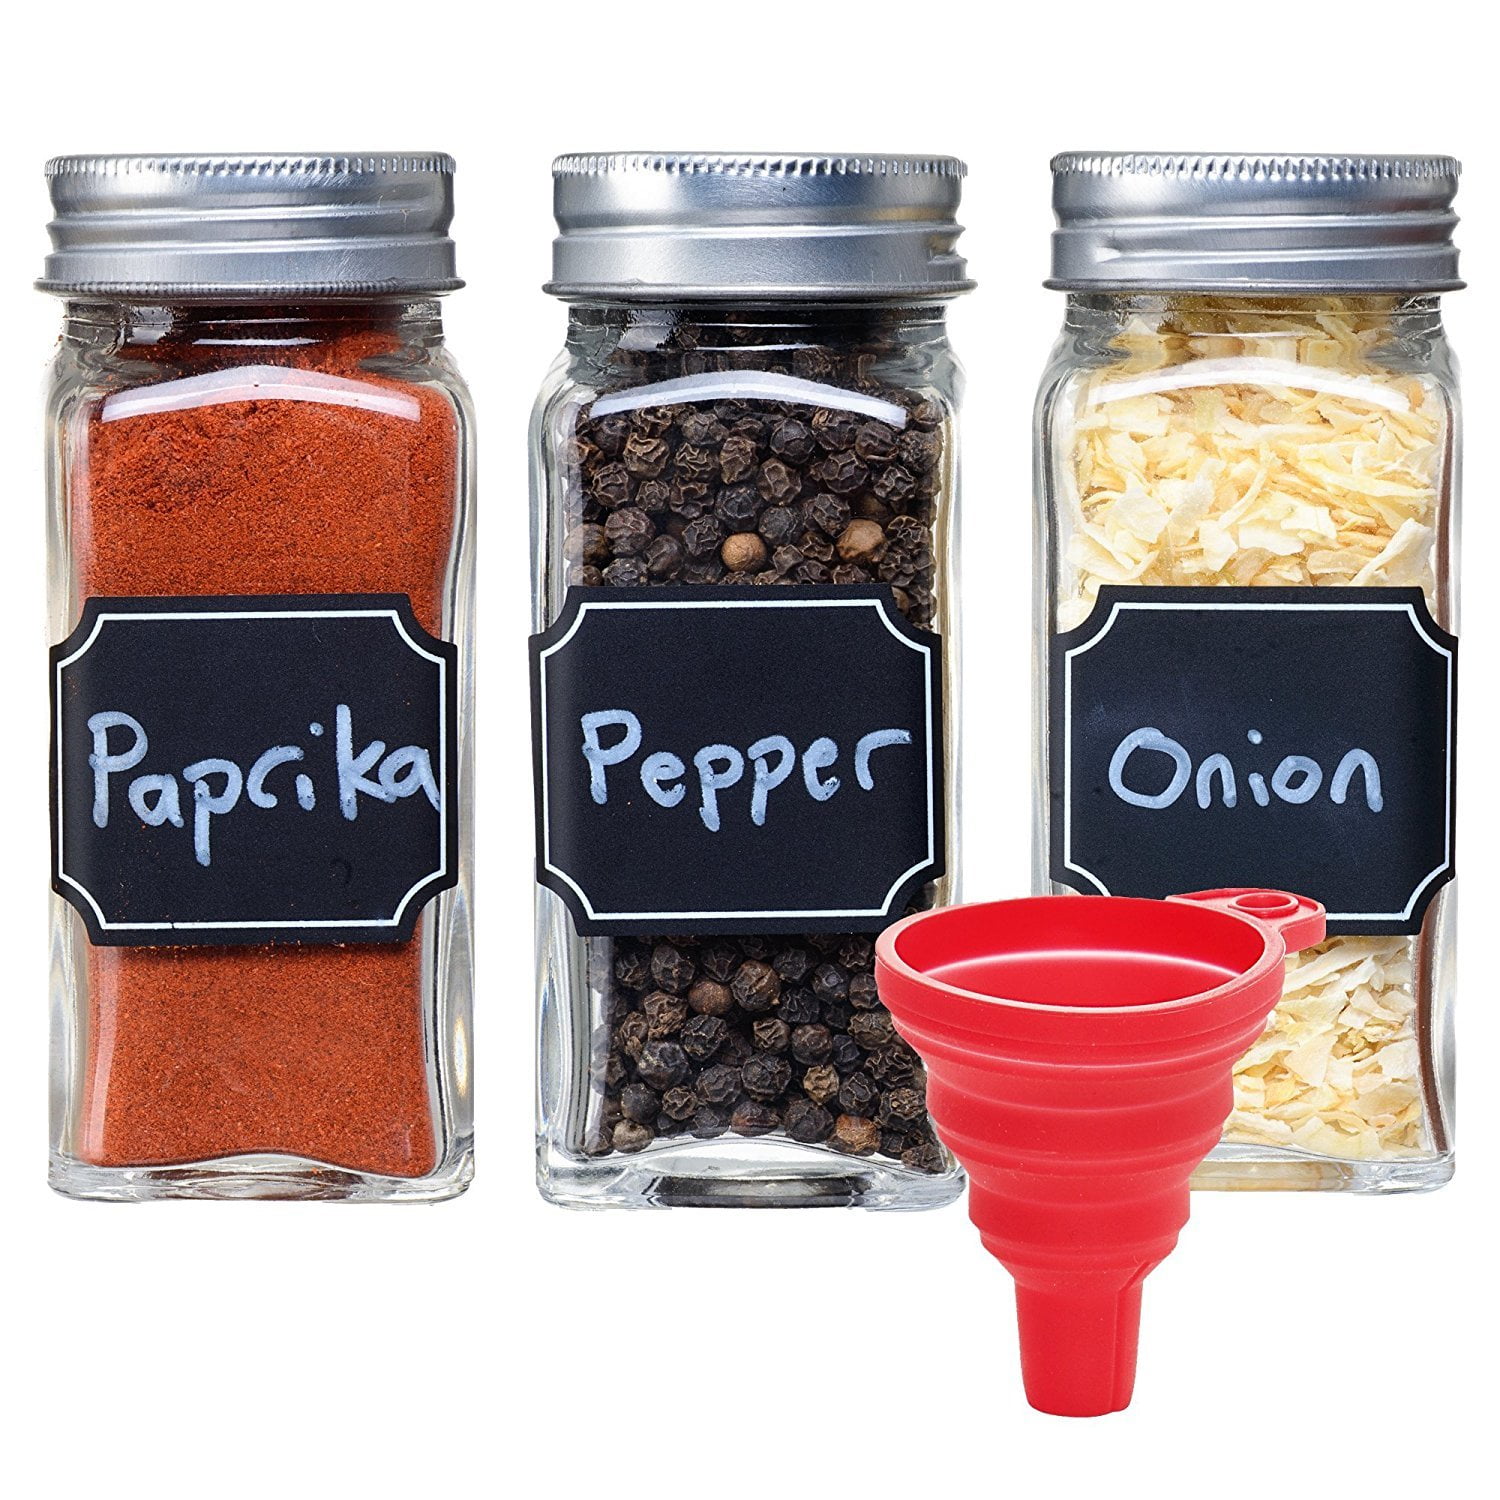 Salt and Pepper Shakers Moisture Proof Set of 4 Small Mini Salt Shaker to go Camping Picnic Outdoors Kitchen Lunch Boxes Travel Spice Set Clear with Red Covers Plastic Airtight Spice Jar Dispenser